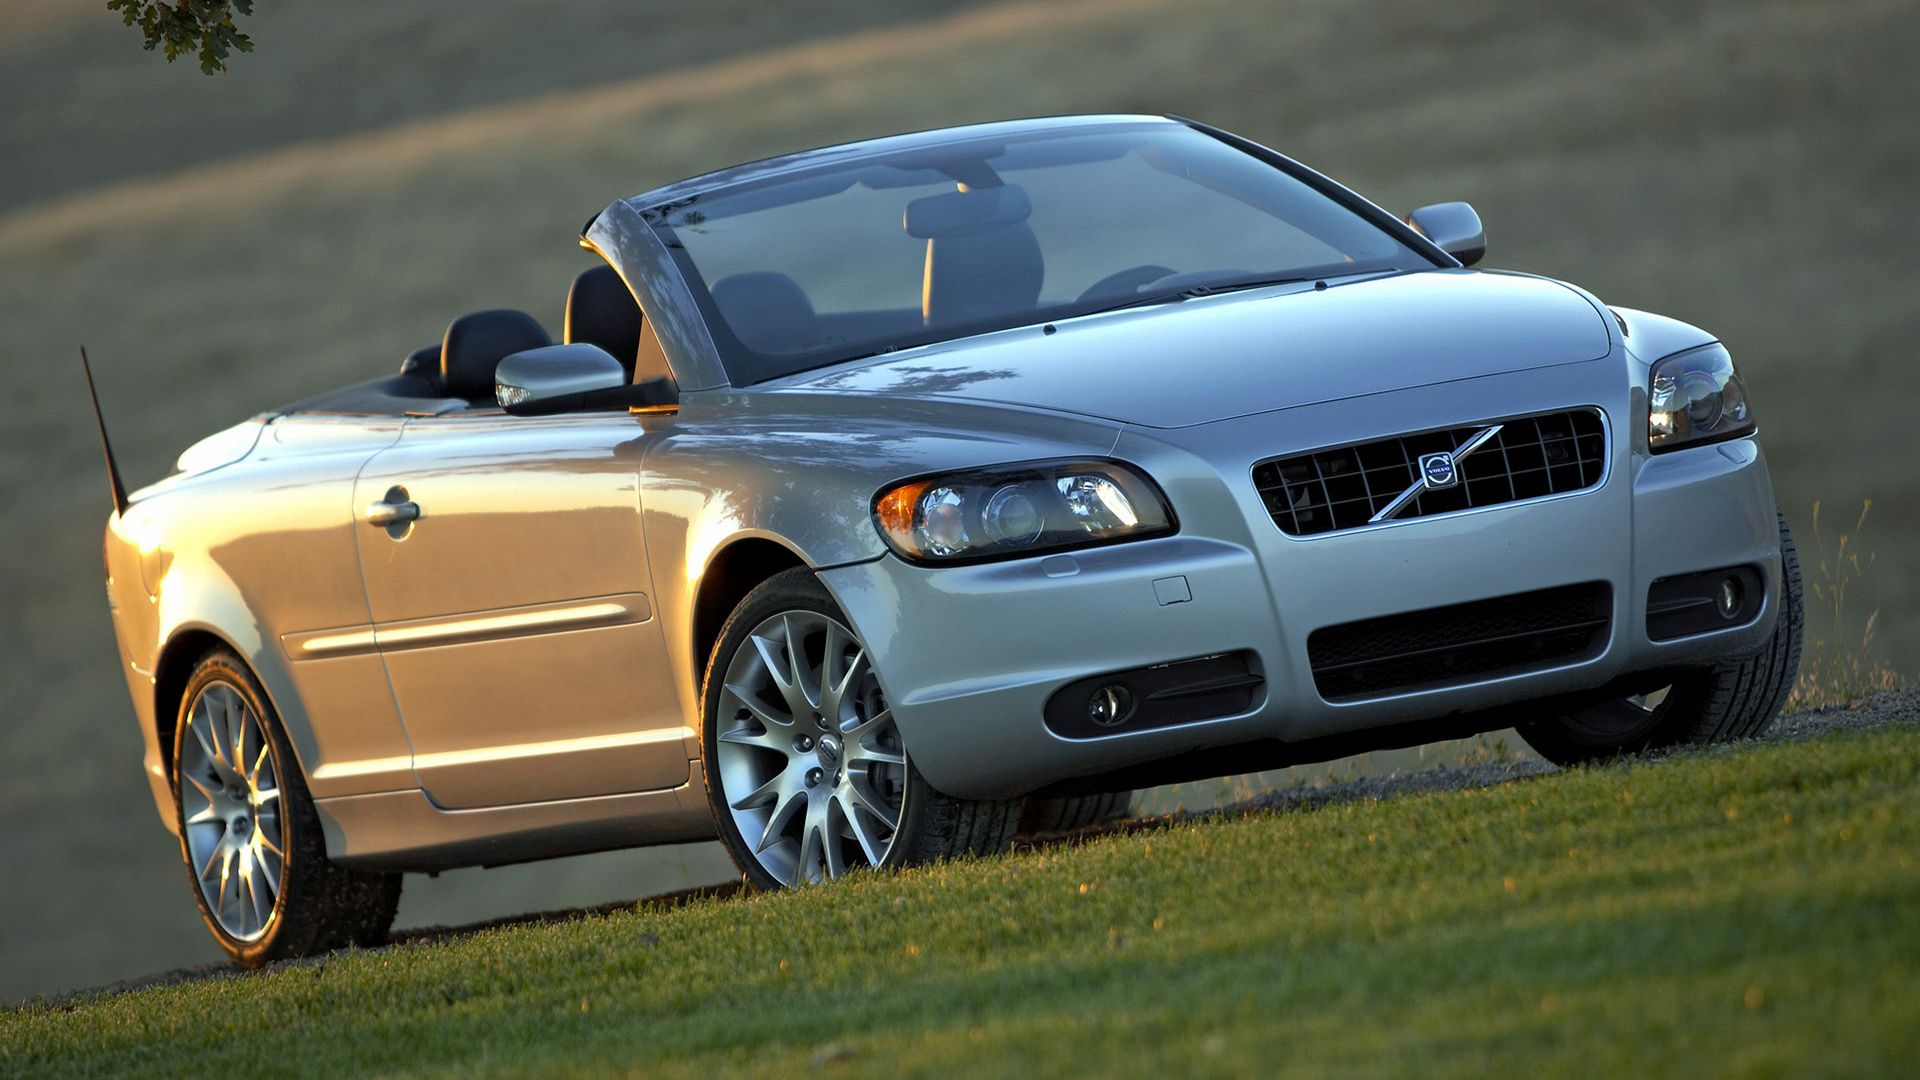 Silver Volvo C70 Convertible front view